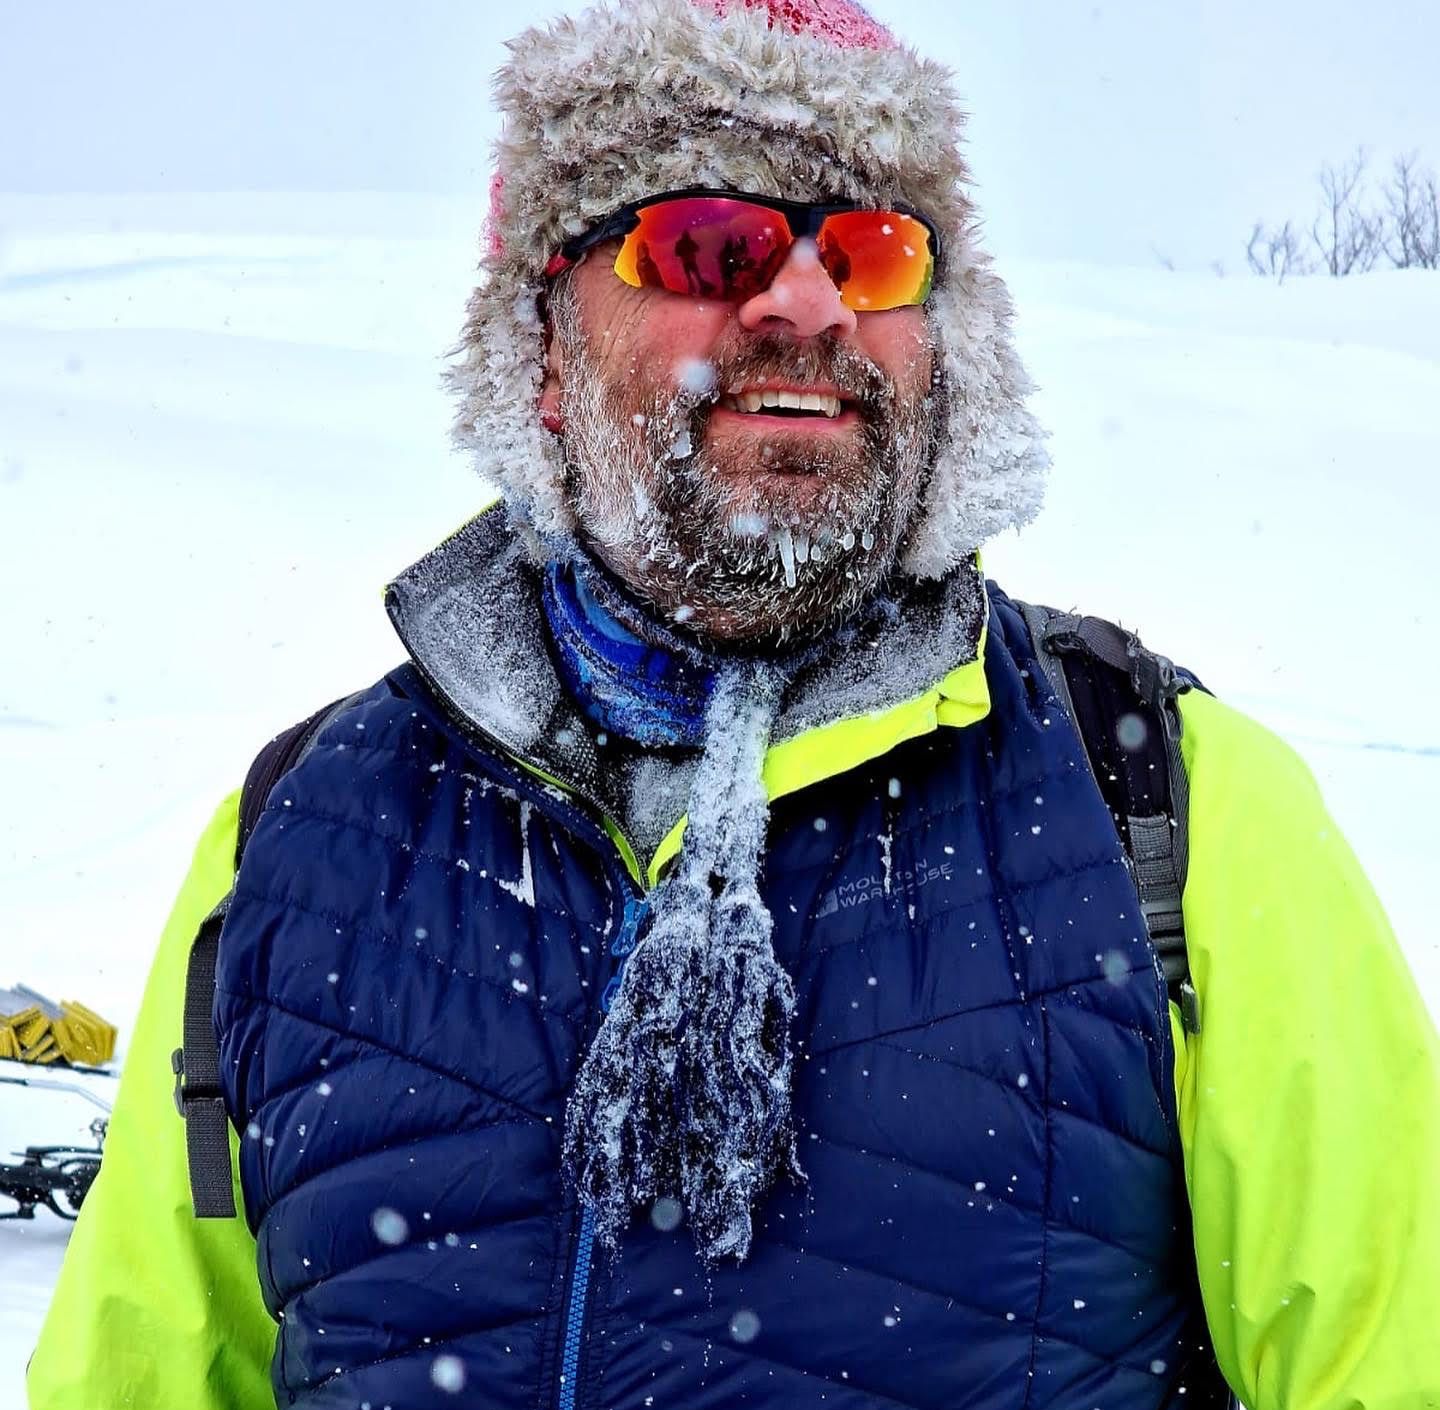 Andy in the Arctic, surrounded by ice crystals in the air.